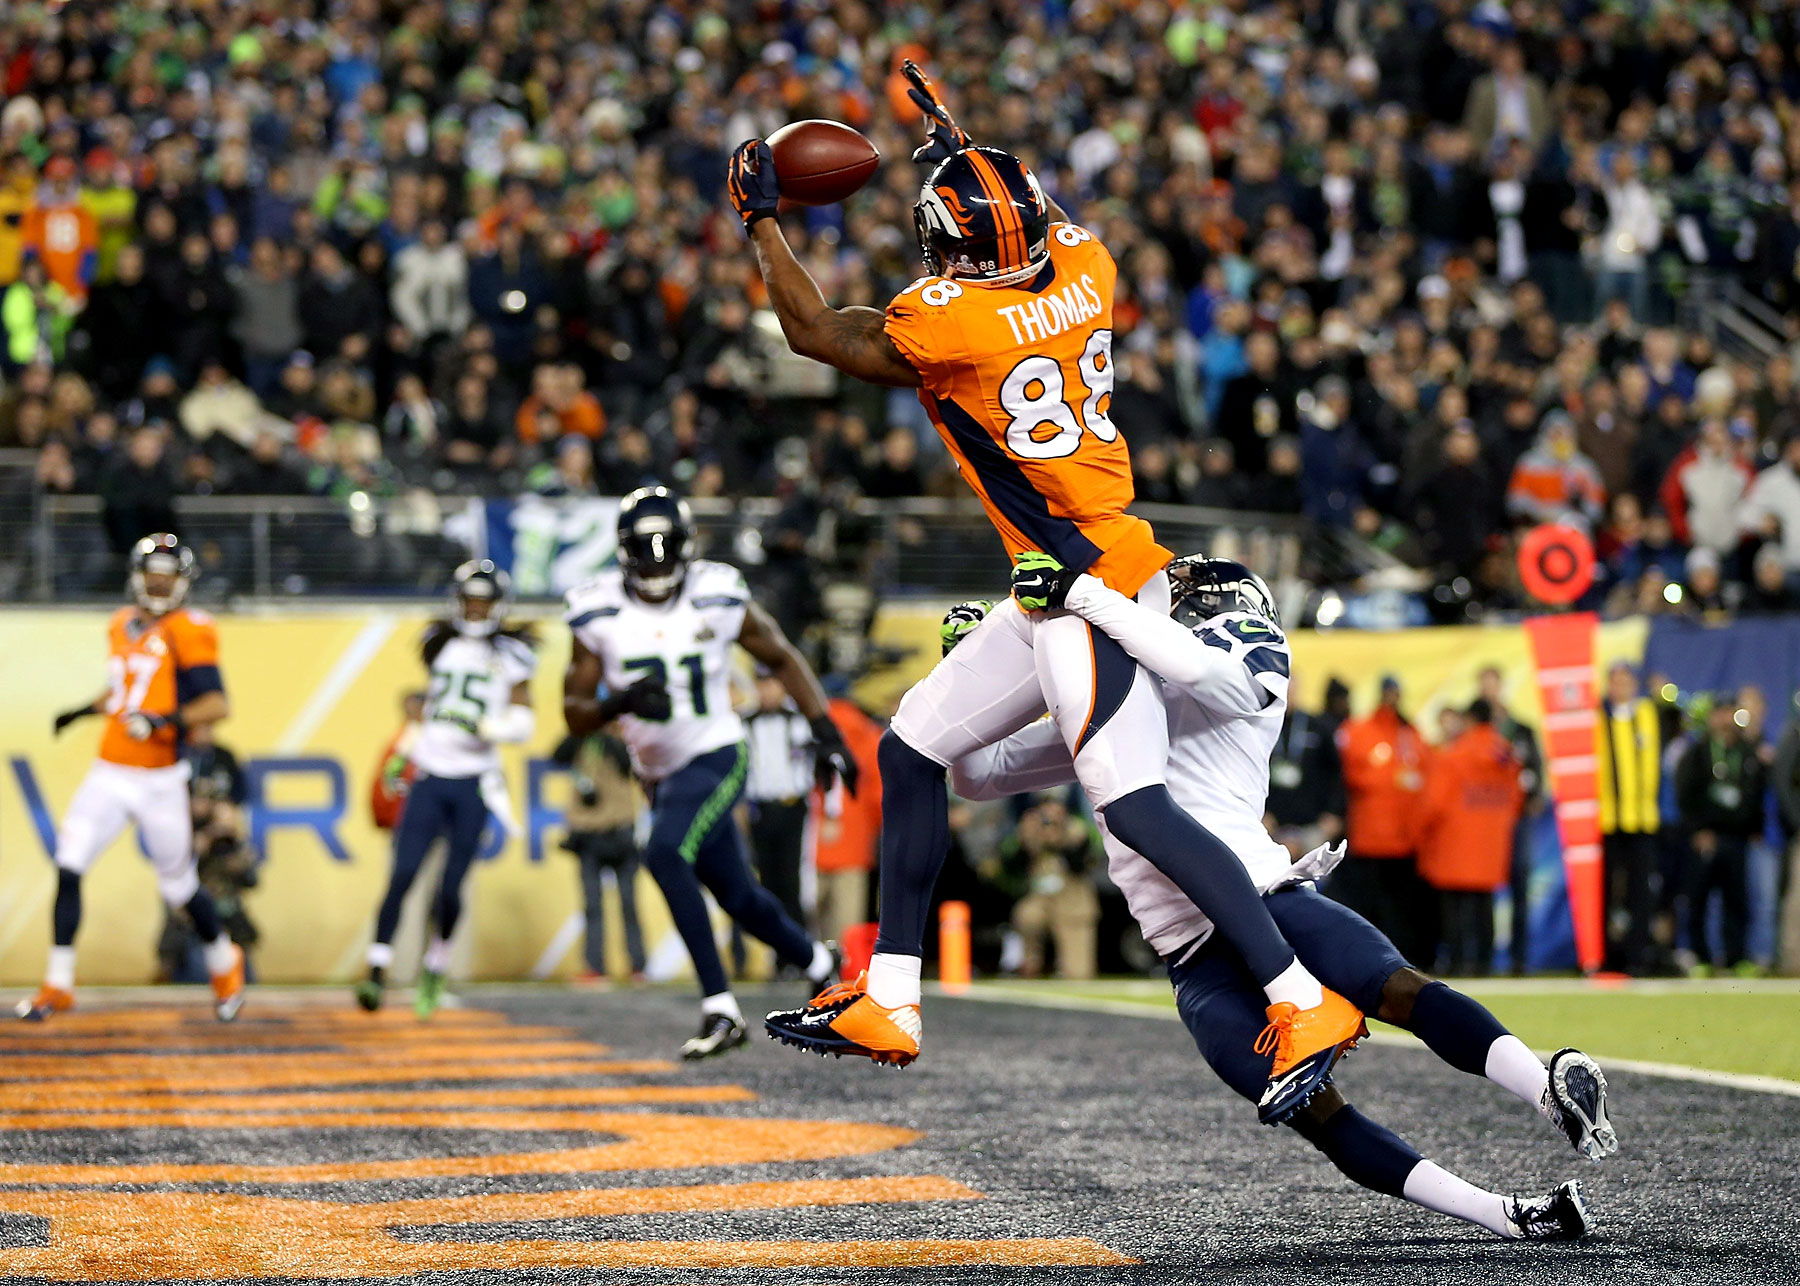 Wide receiver Demaryius Thomas of the Denver Broncos ran 14 yards to score a touchdown in the third quarter against cornerback Byron Maxwel of the Seattle Seahawks.